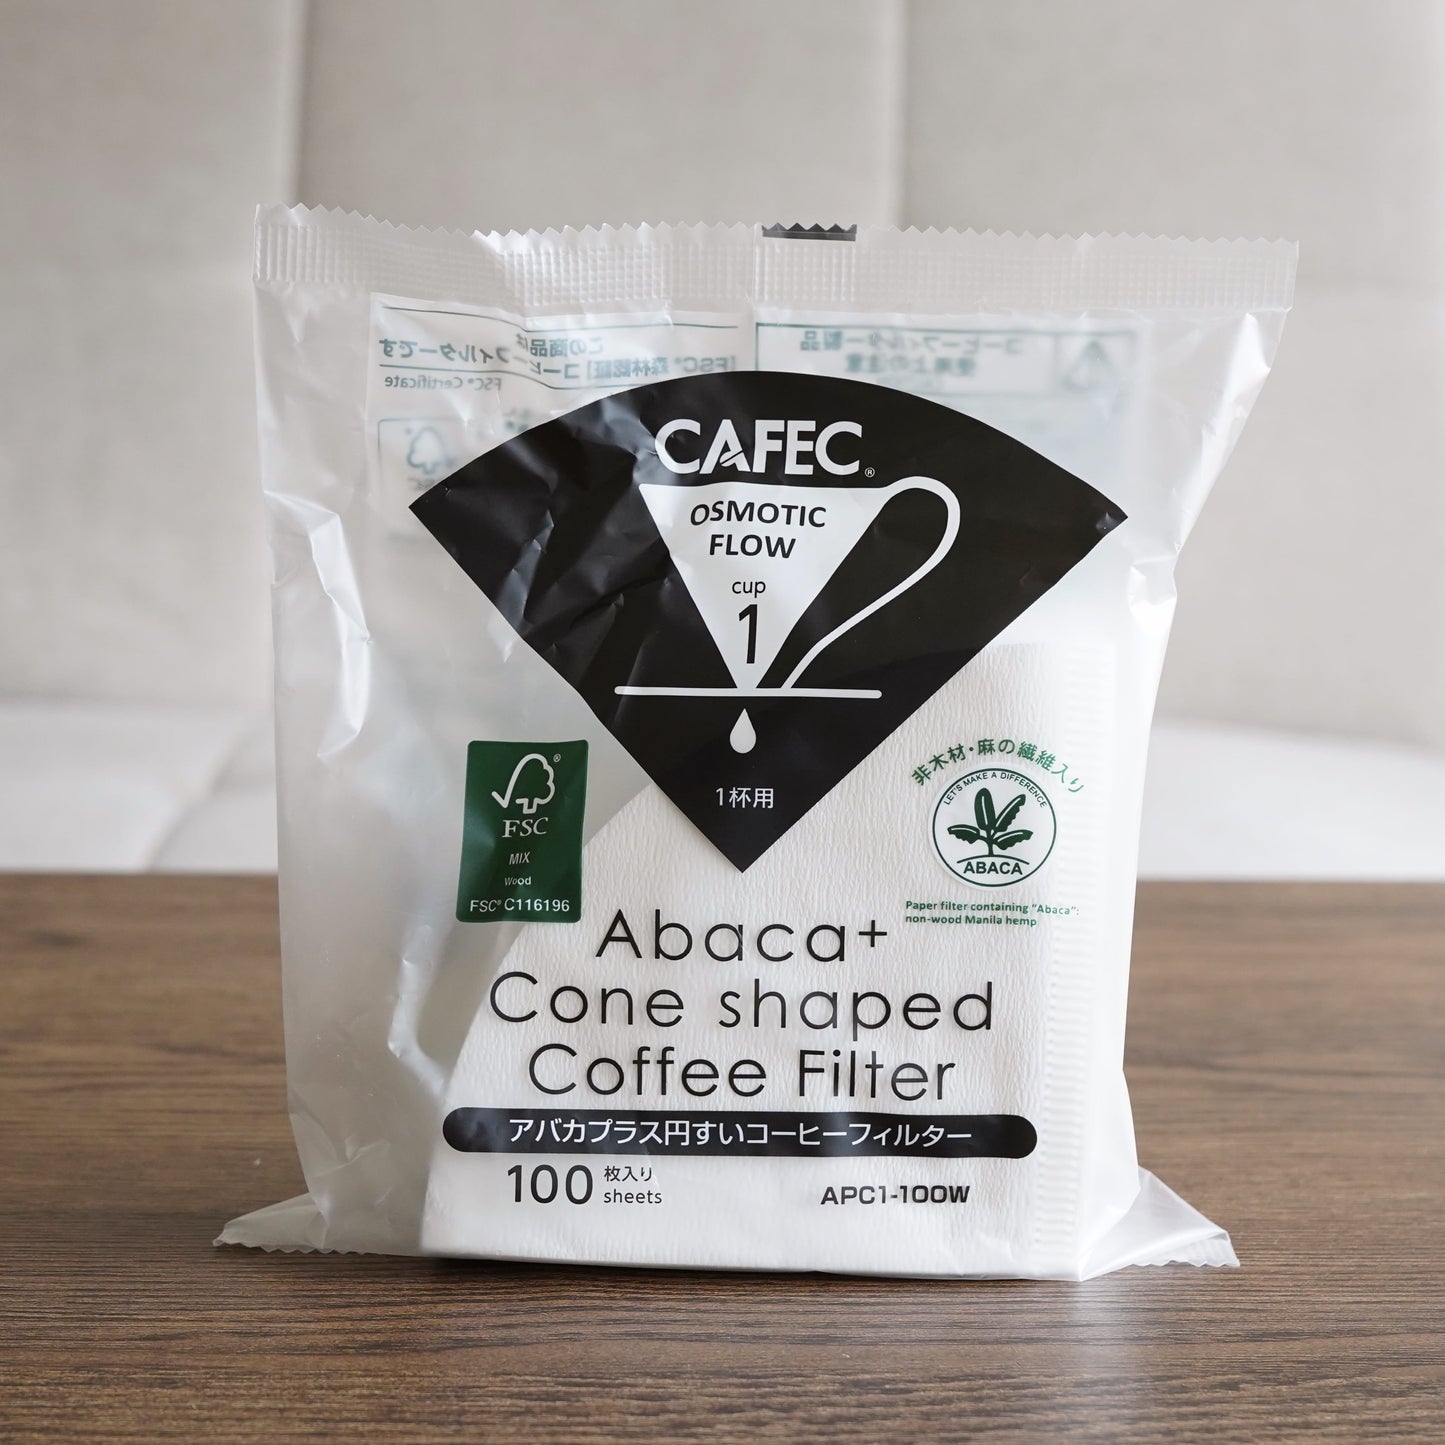 Cafec Abaca Paper Filter Cone 1 cups Basic Barista Australia Melbourne Filter Paper Papers Banana Coffee Filter Brewer cone dripper conical coffee maker papers small smaller size coffee drippers